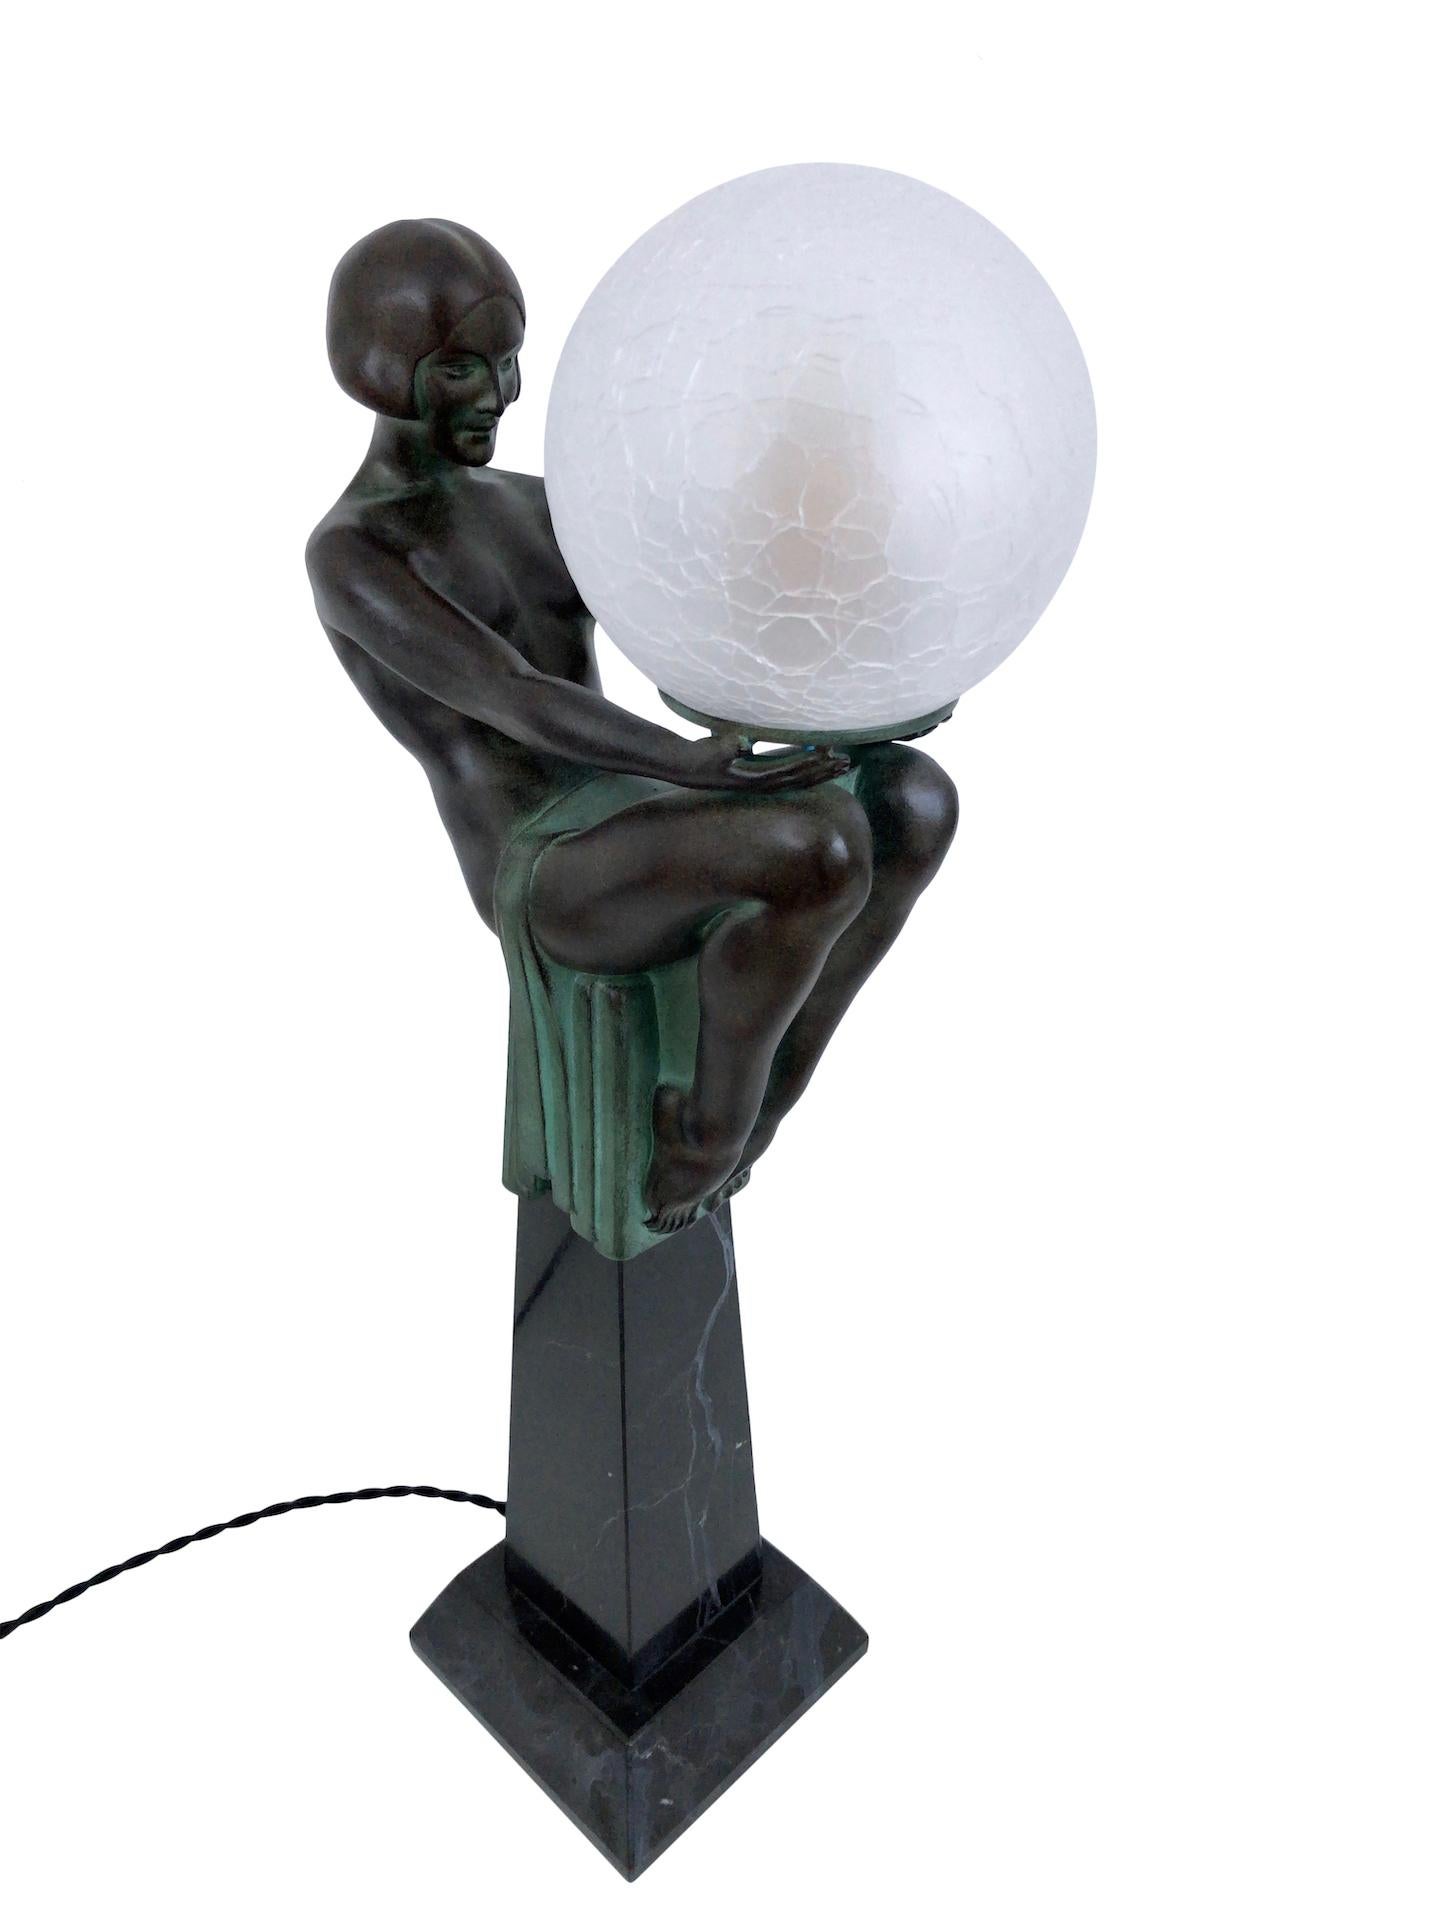 French Enigme Art Deco Style Nude Sculpture on top of an Obelisk Lamp by Max Le Verrier